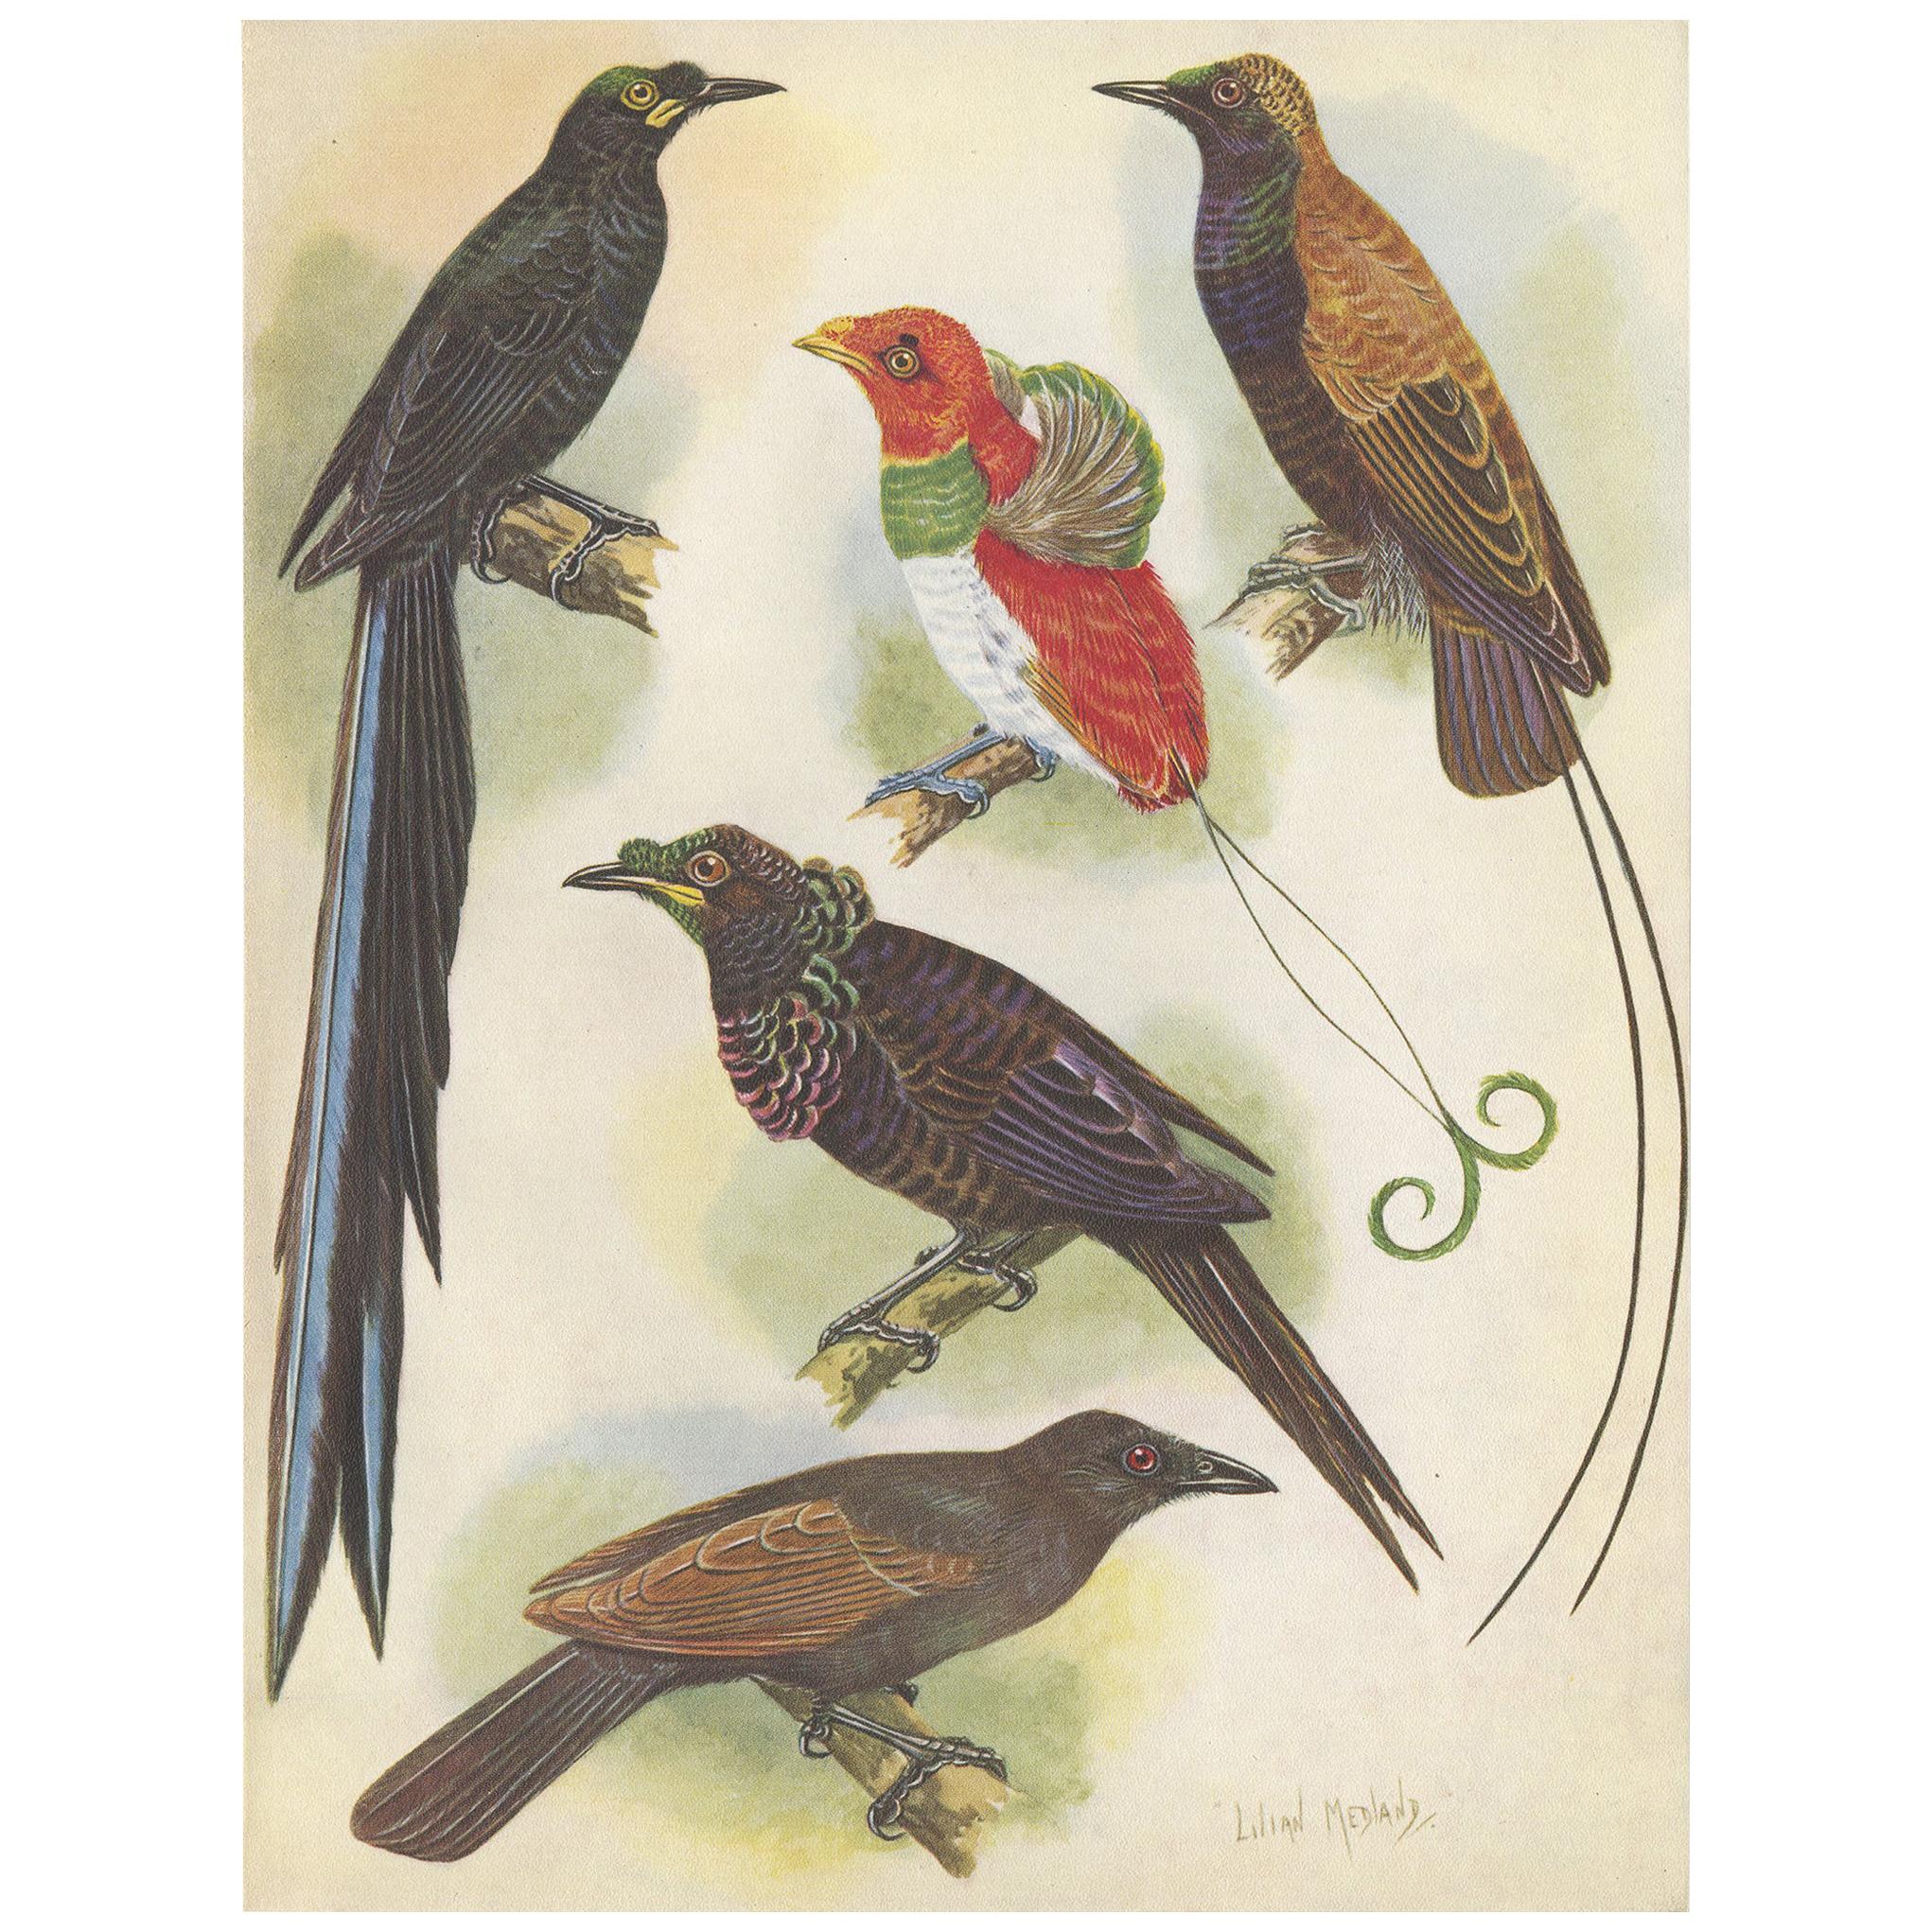 Antique Print of the False-Lobed Longtail and Others, 1950